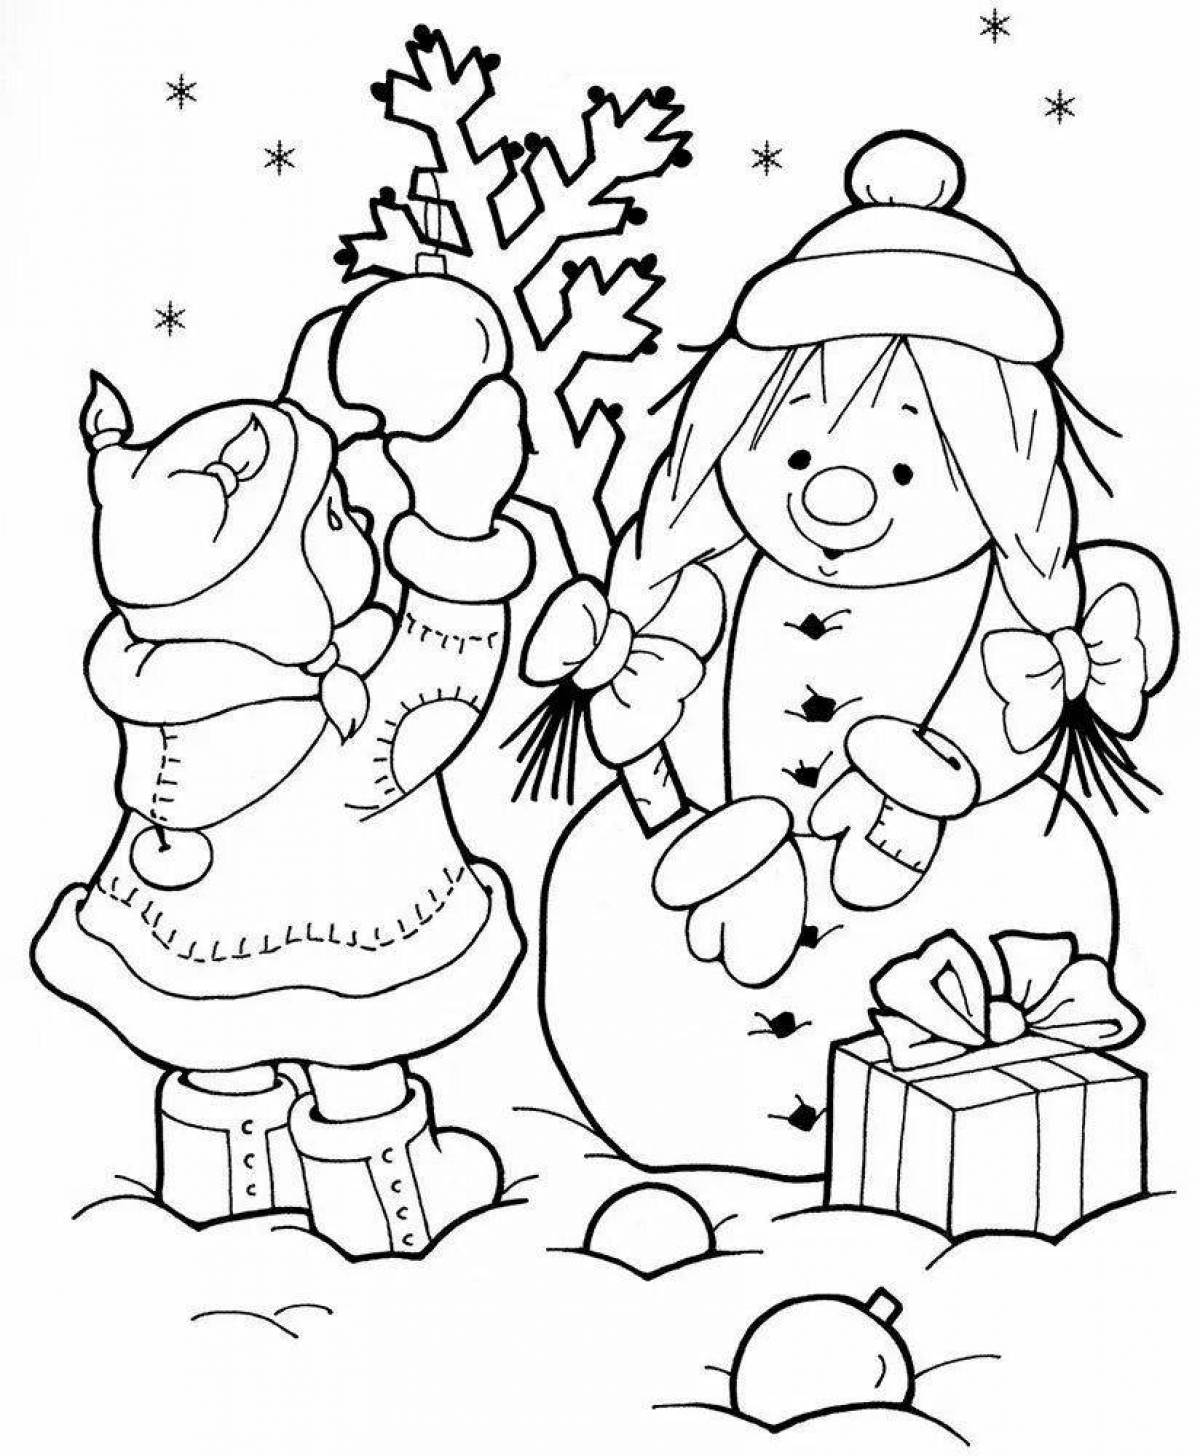 Merry winter coloring book for children